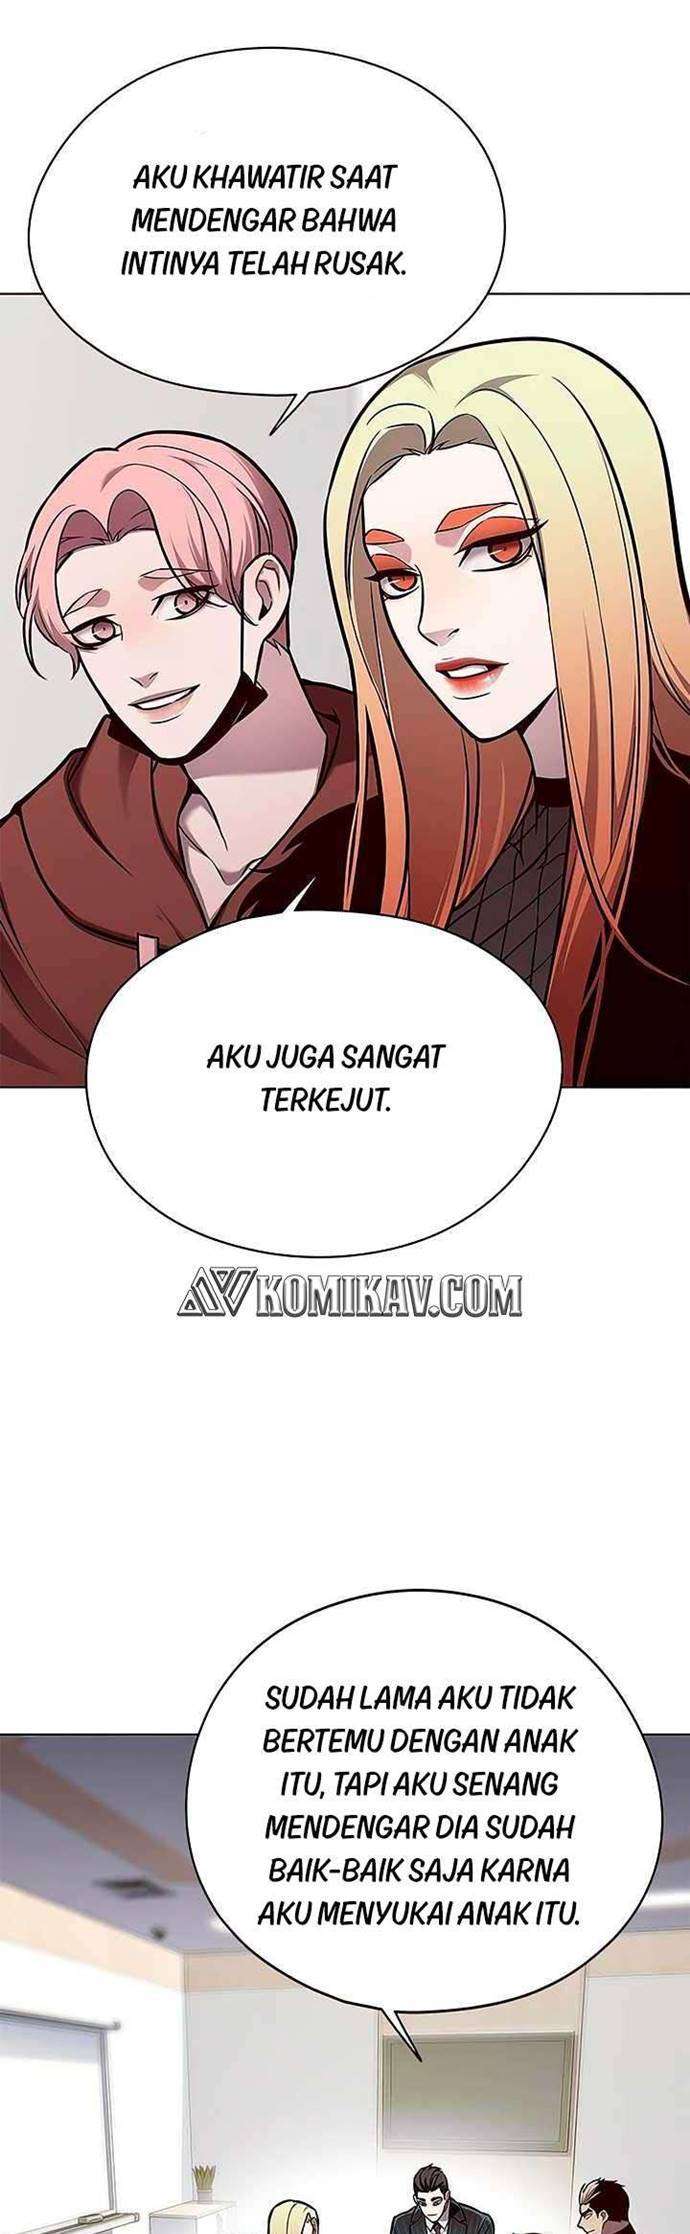 Eleceed Chapter 146